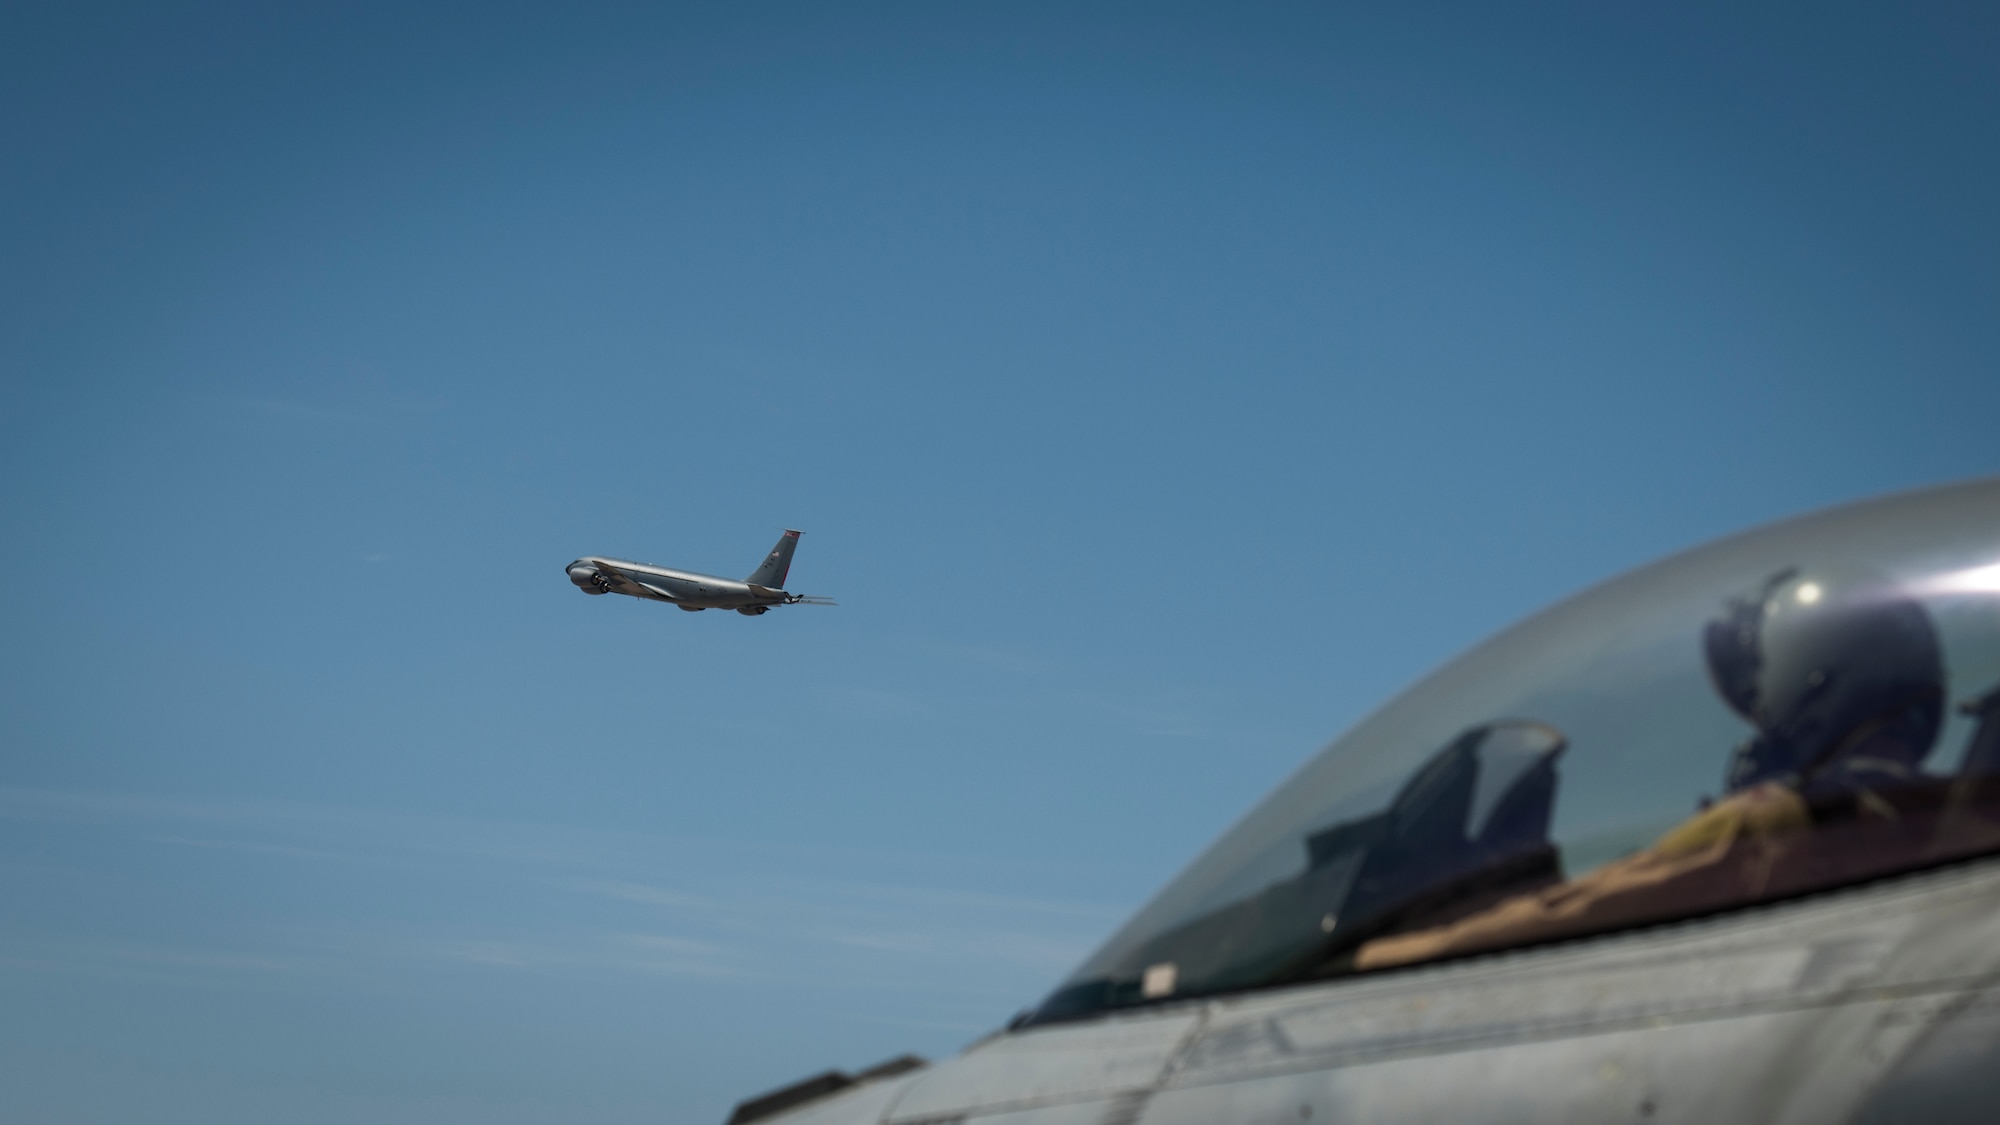 A U.S. Air Force F-16 “Viper” Fighting Falcon pilot assigned to the 79th Expeditionary Fighter Squadron looks on as a U.S. Air Force KC-135 Stratotanker takes off at an undisclosed location in the U.S. Central Command area of responsibility, Feb. 24, 2020.